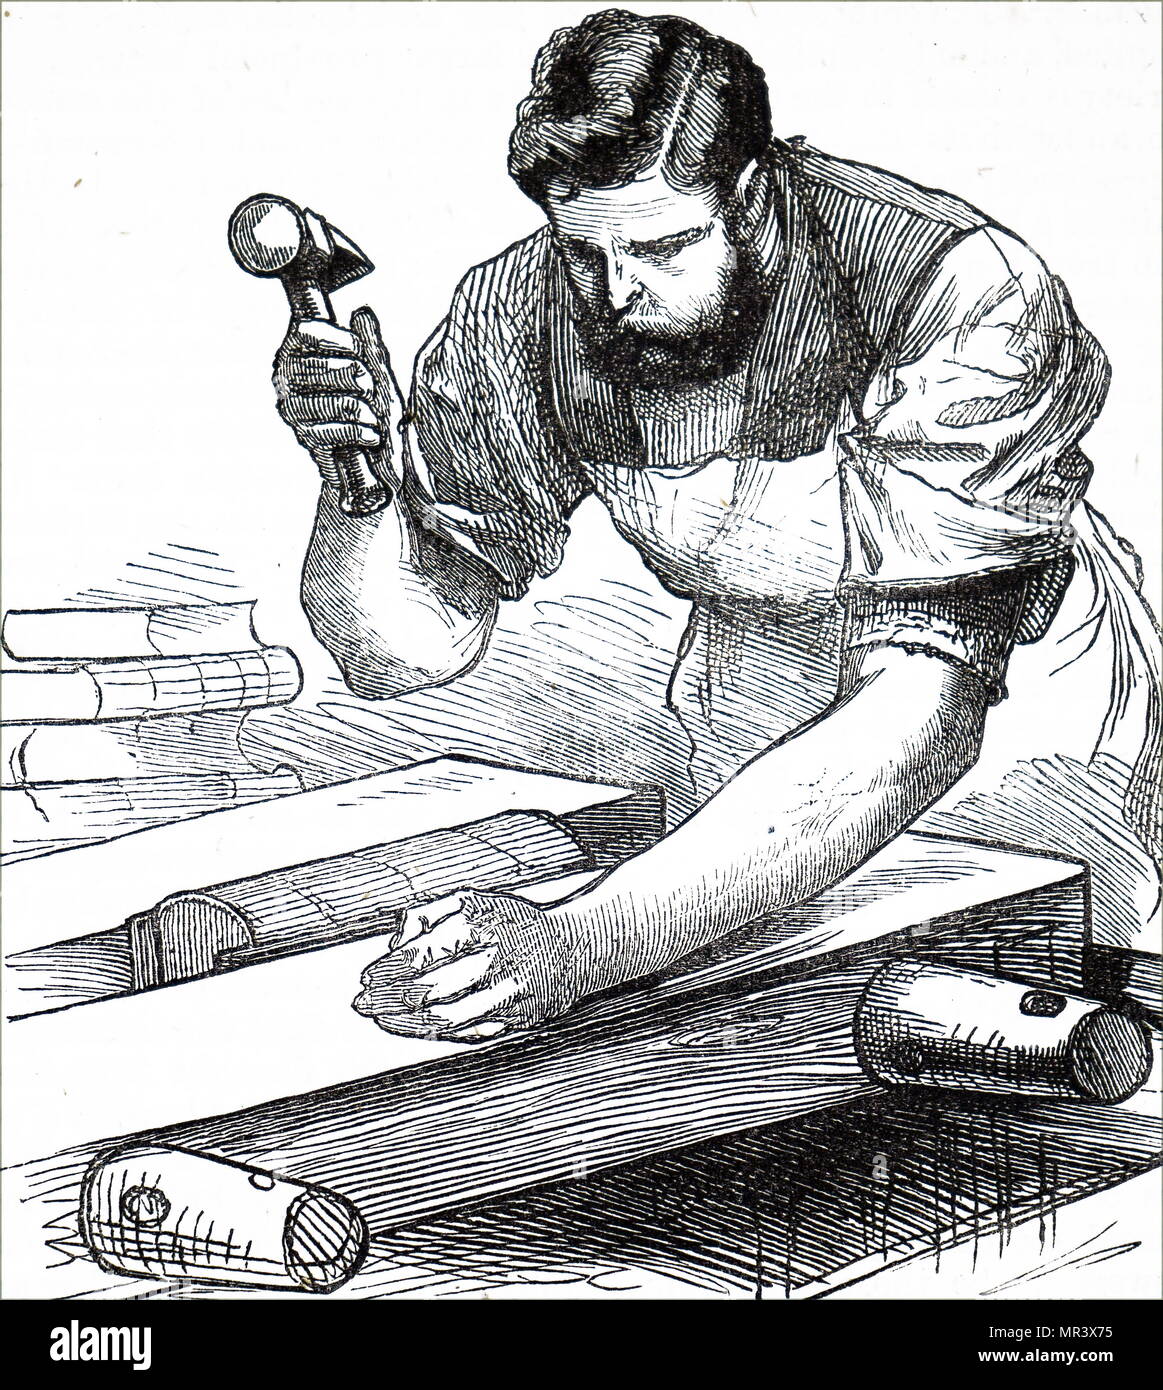 Engraving depicting a process in bookbinding: rounding the back of sewn sections to produce swell to strengthen the spine and ensure proper opening of the bound volume. Dated 19th century Stock Photo